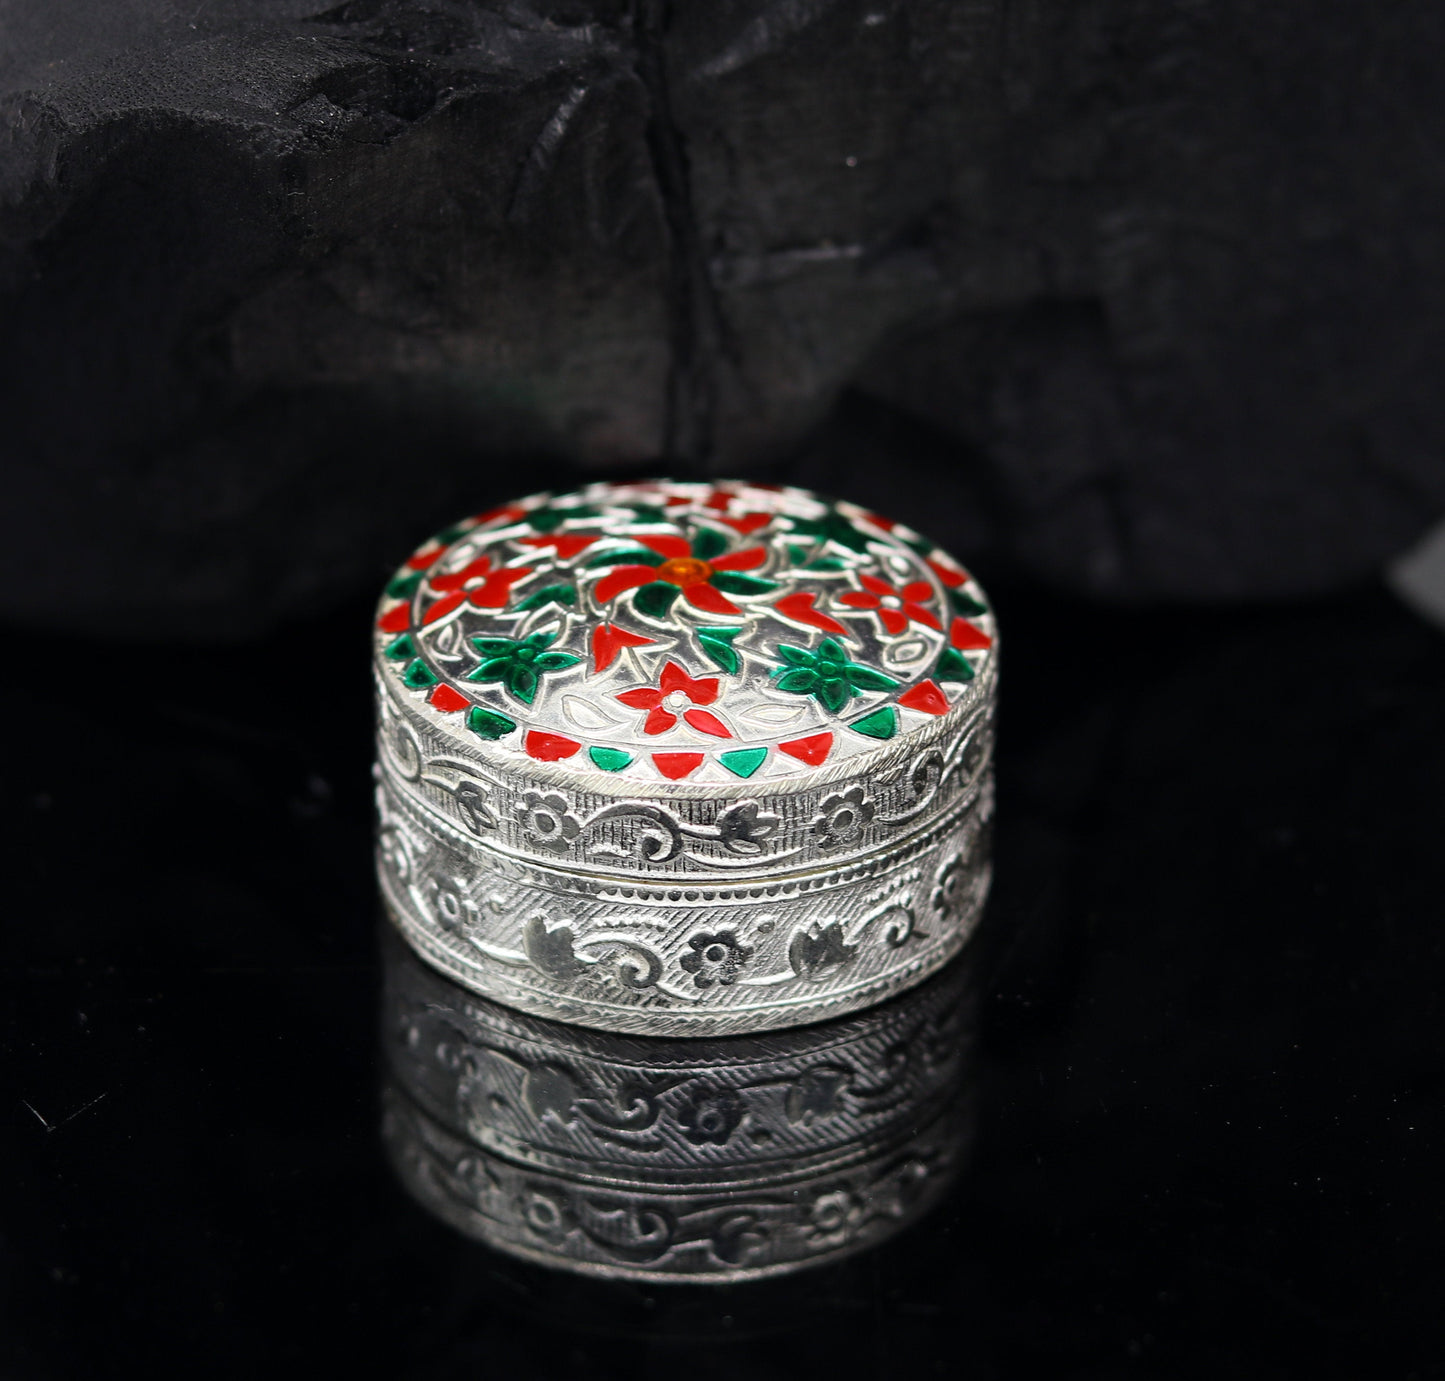 925 sterling silver trinket box, kumkum box/ casket box bridal gifts enamel jewelry box collection, container box, jewelry box art stb49 - TRIBAL ORNAMENTS